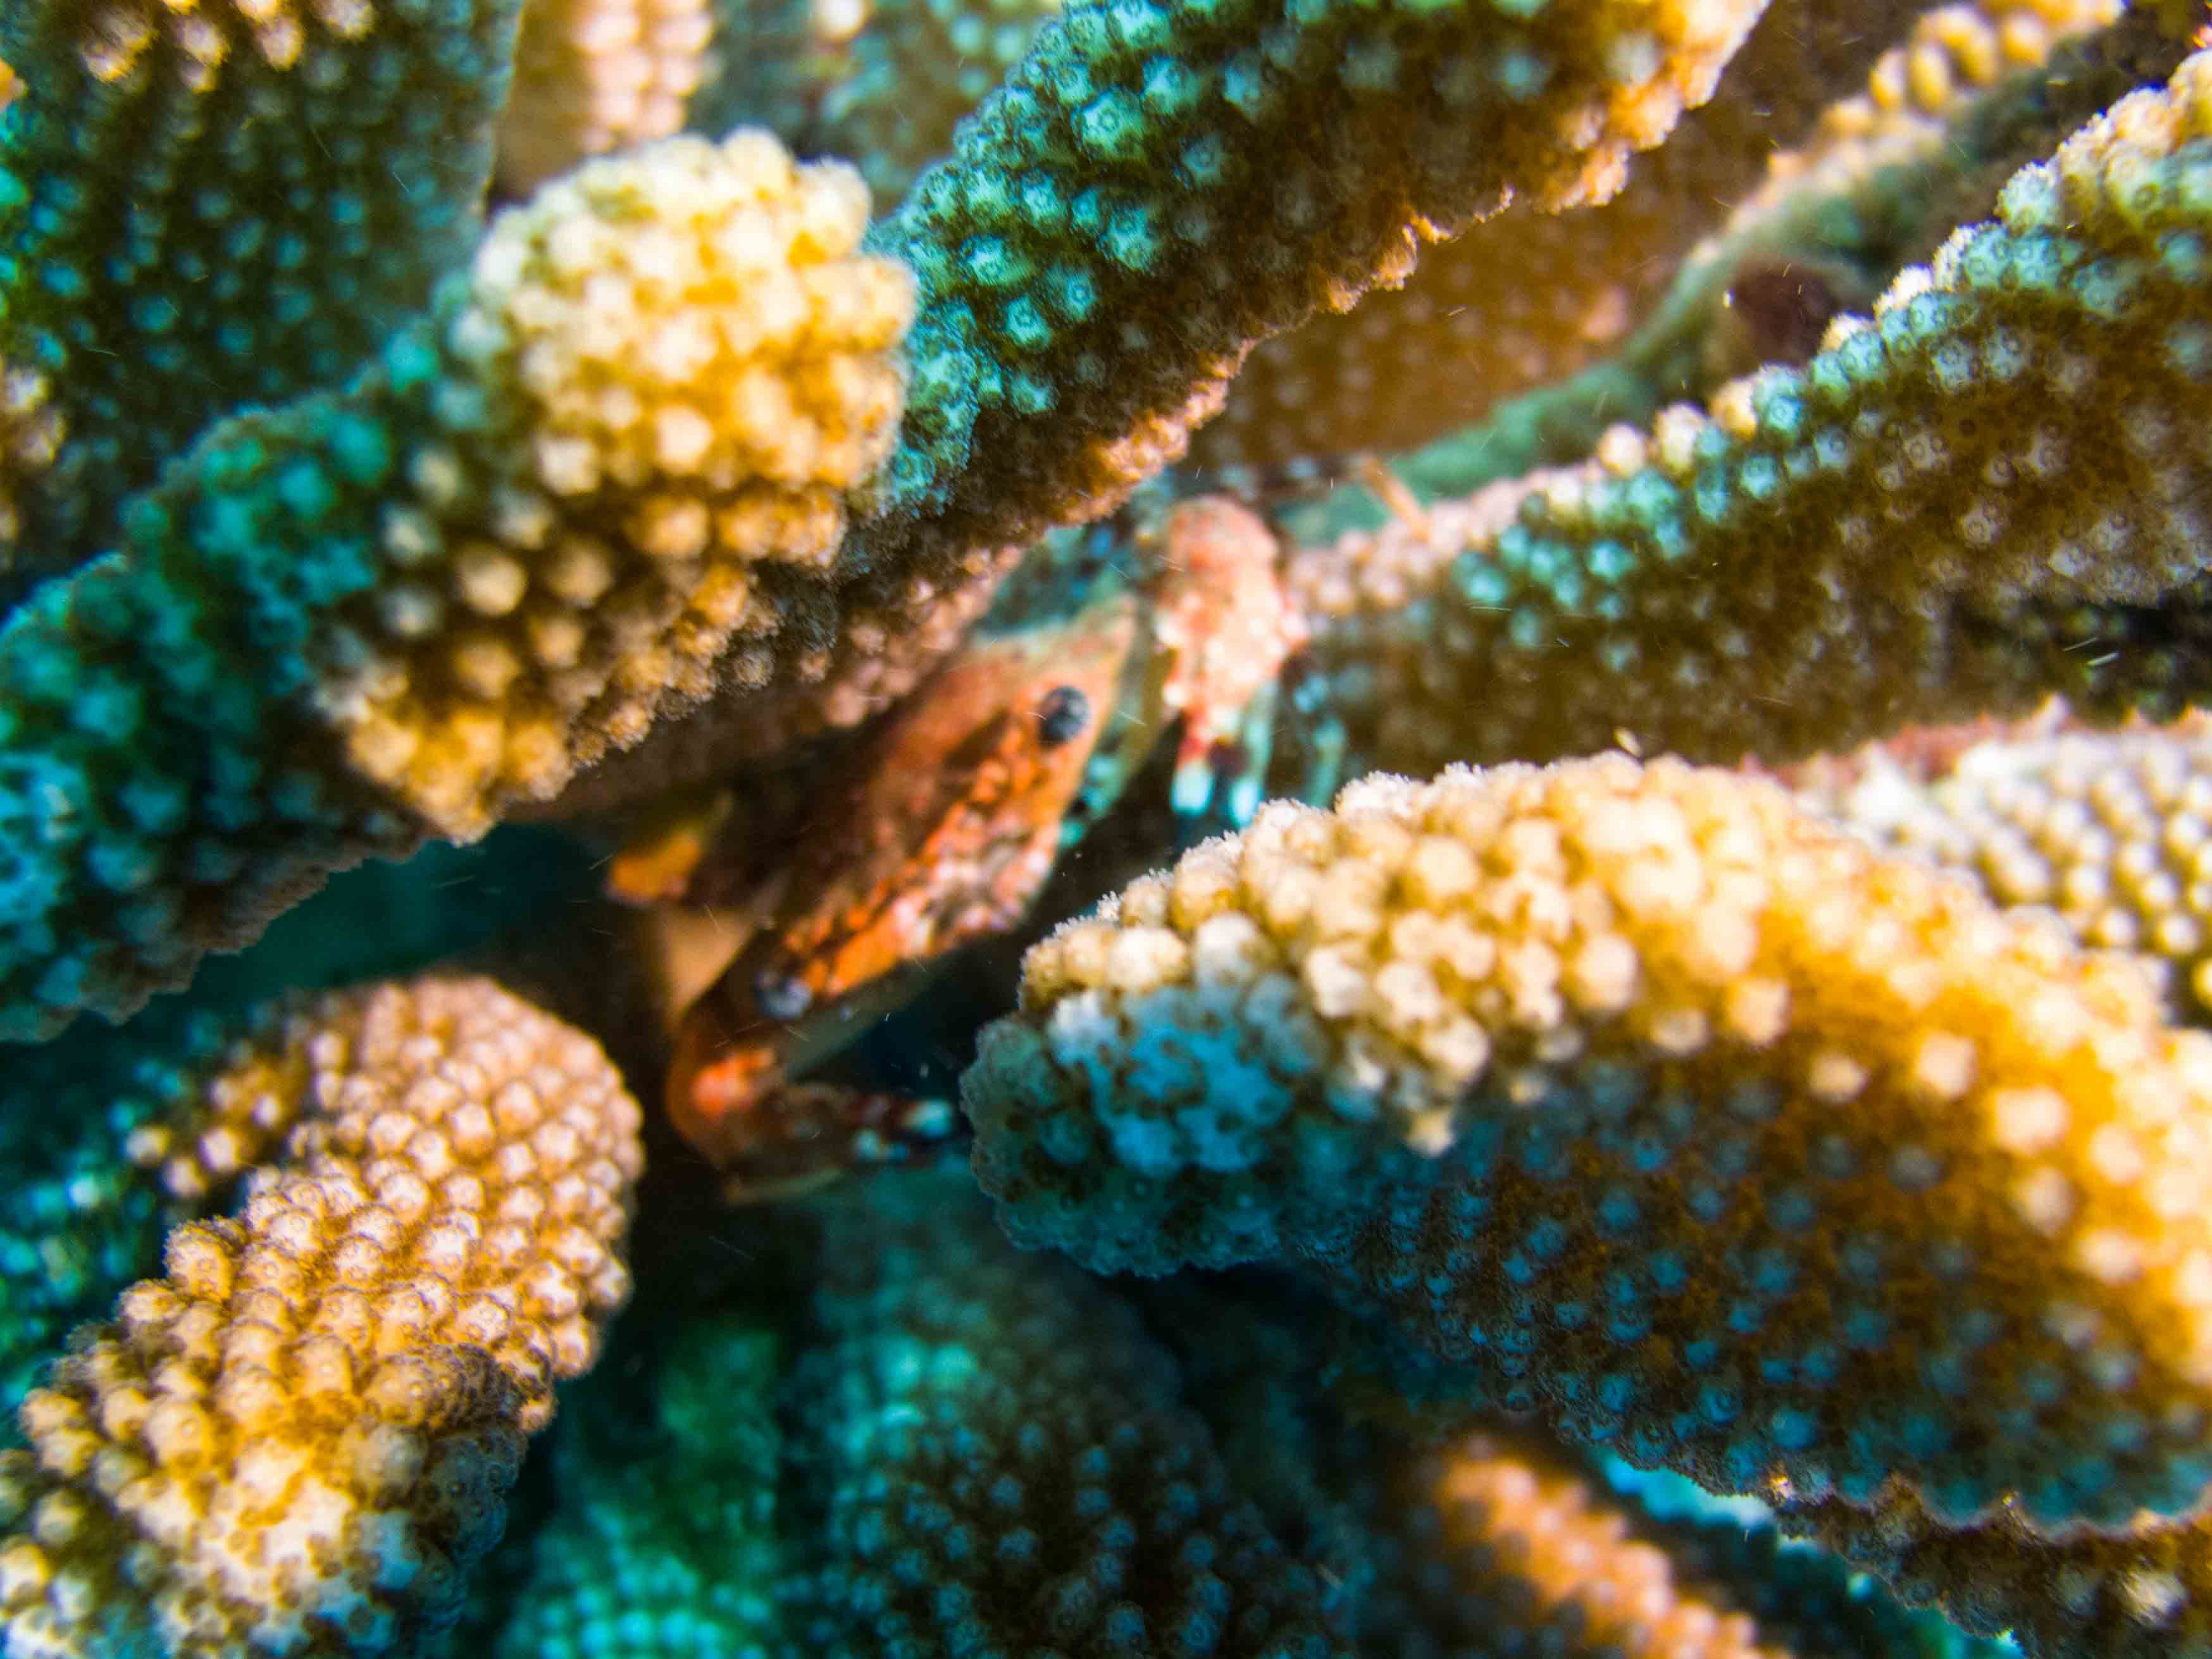 Yellow Spotted Guard Crab in Antler Coral